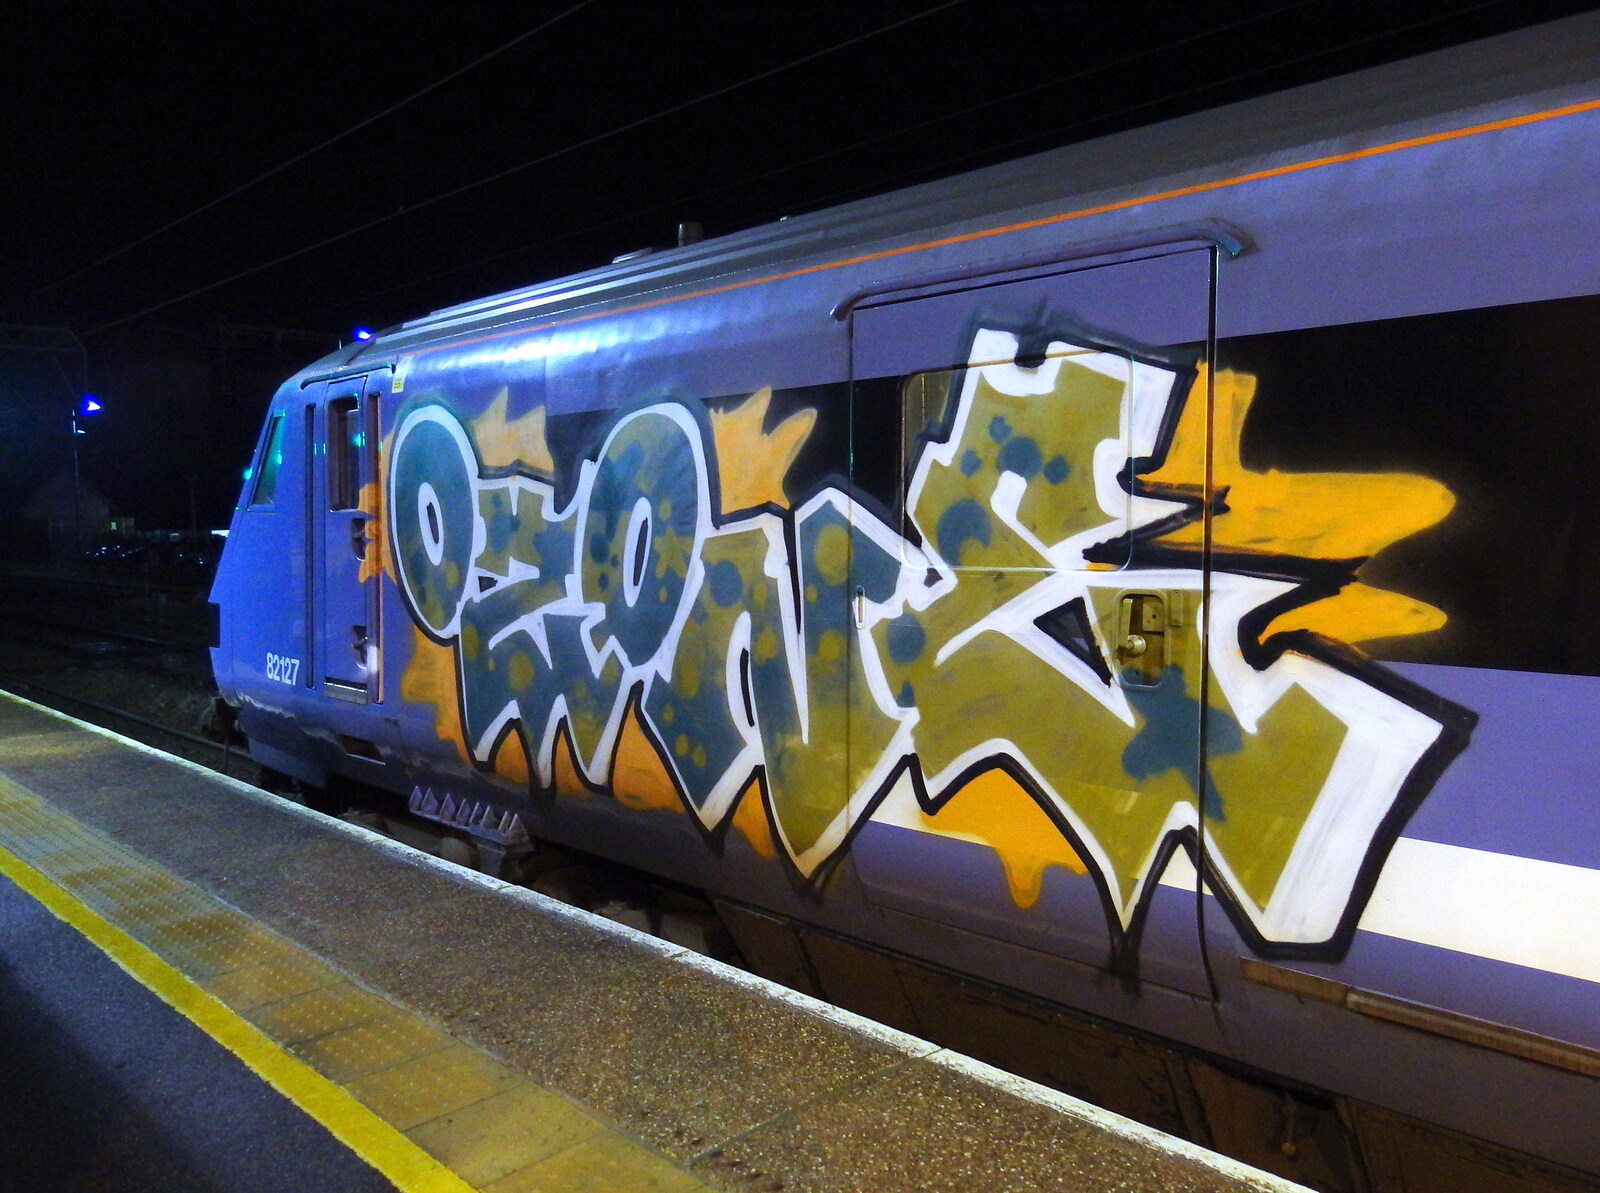 The DVT on the 17:35 at Diss has been tagged with graffiti from A Ross Street Reunion, Hoxne, Suffolk - 25th January 2014